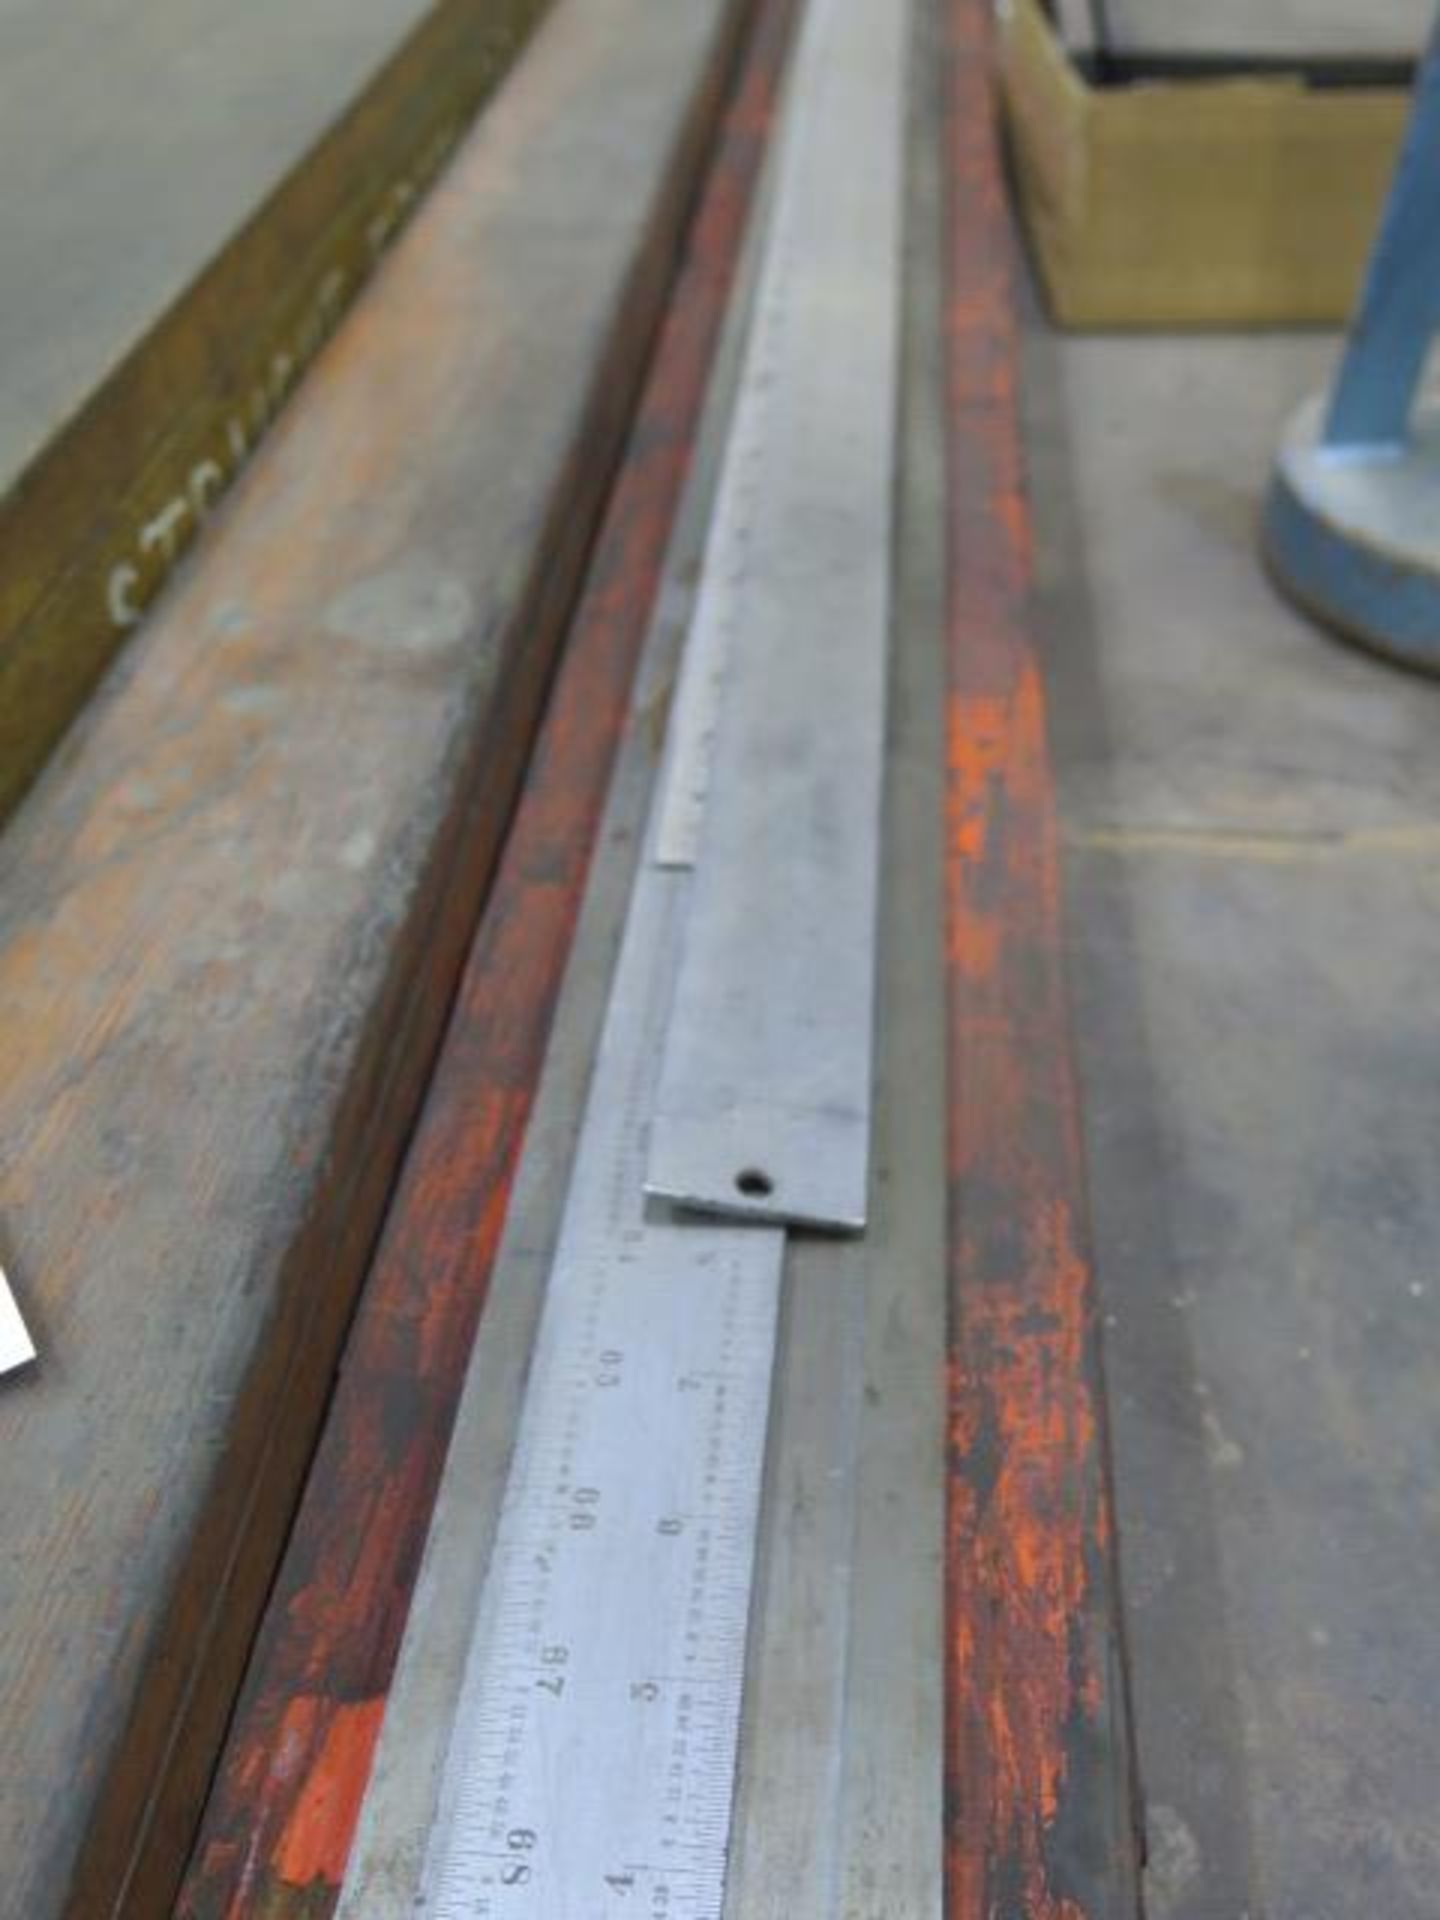 72" Straight Edge and 72" Scale (SOLD AS-IS - NO WARRANTY) - Image 2 of 5